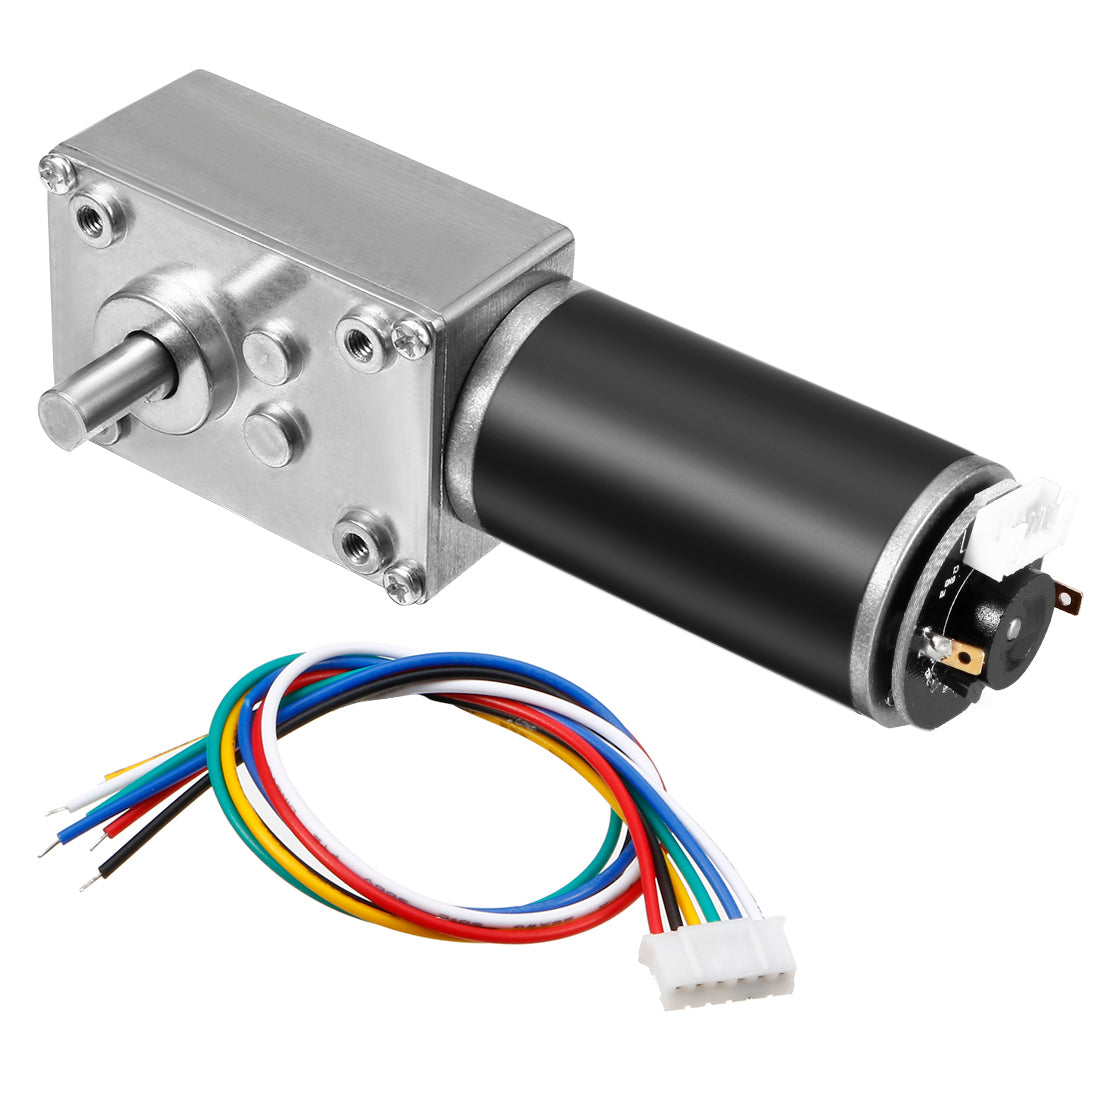 uxcell Uxcell DC 12V 230RPM 2Kg.cm Self-Locking Worm Gear Motor With Encoder And Cable, High Torque Speed Reduction Motor